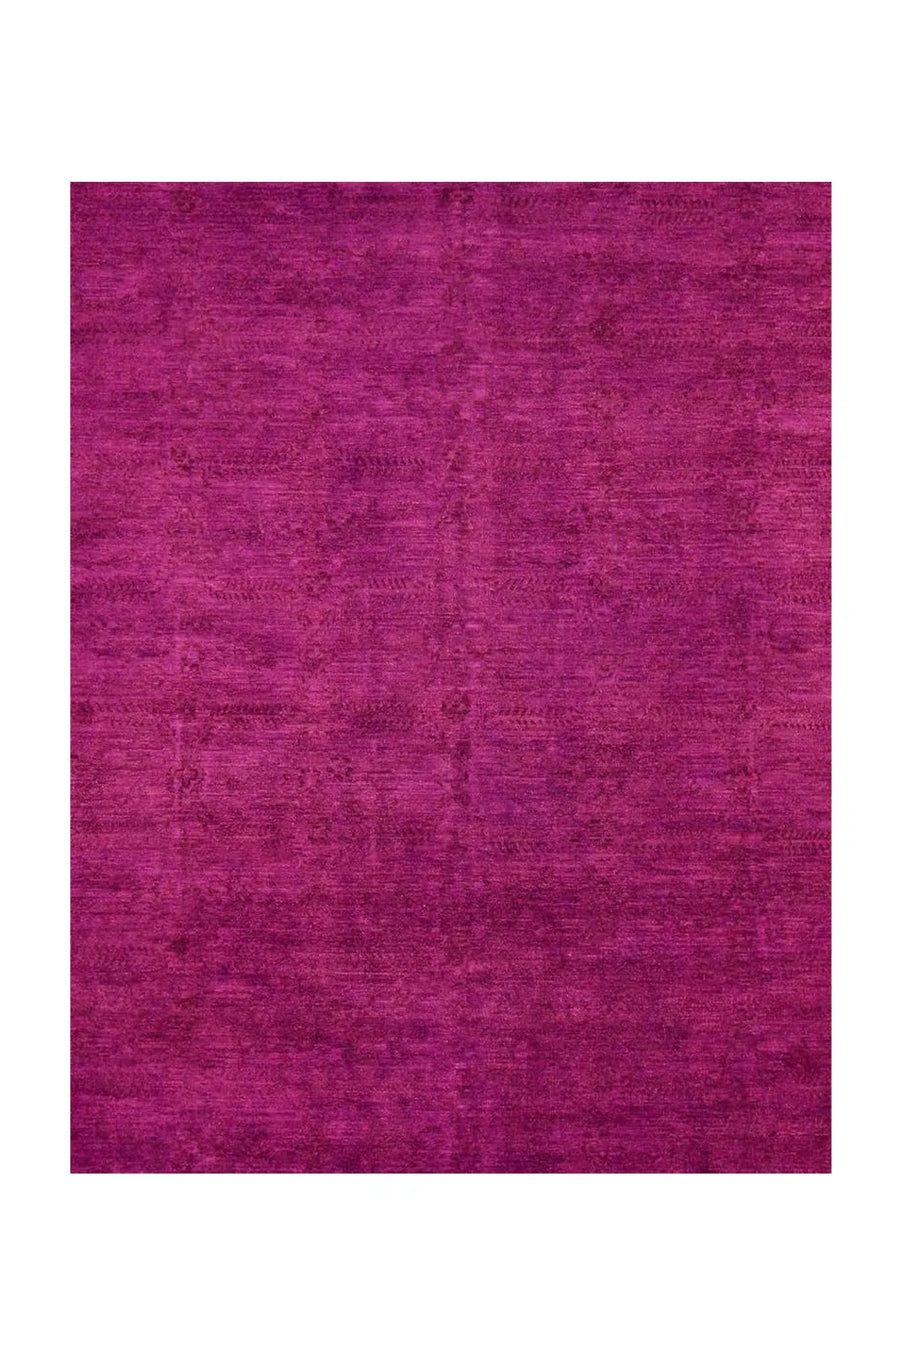 Artisan-crafted Hot Pink Wool Rug with a plush feel for modern interiors.